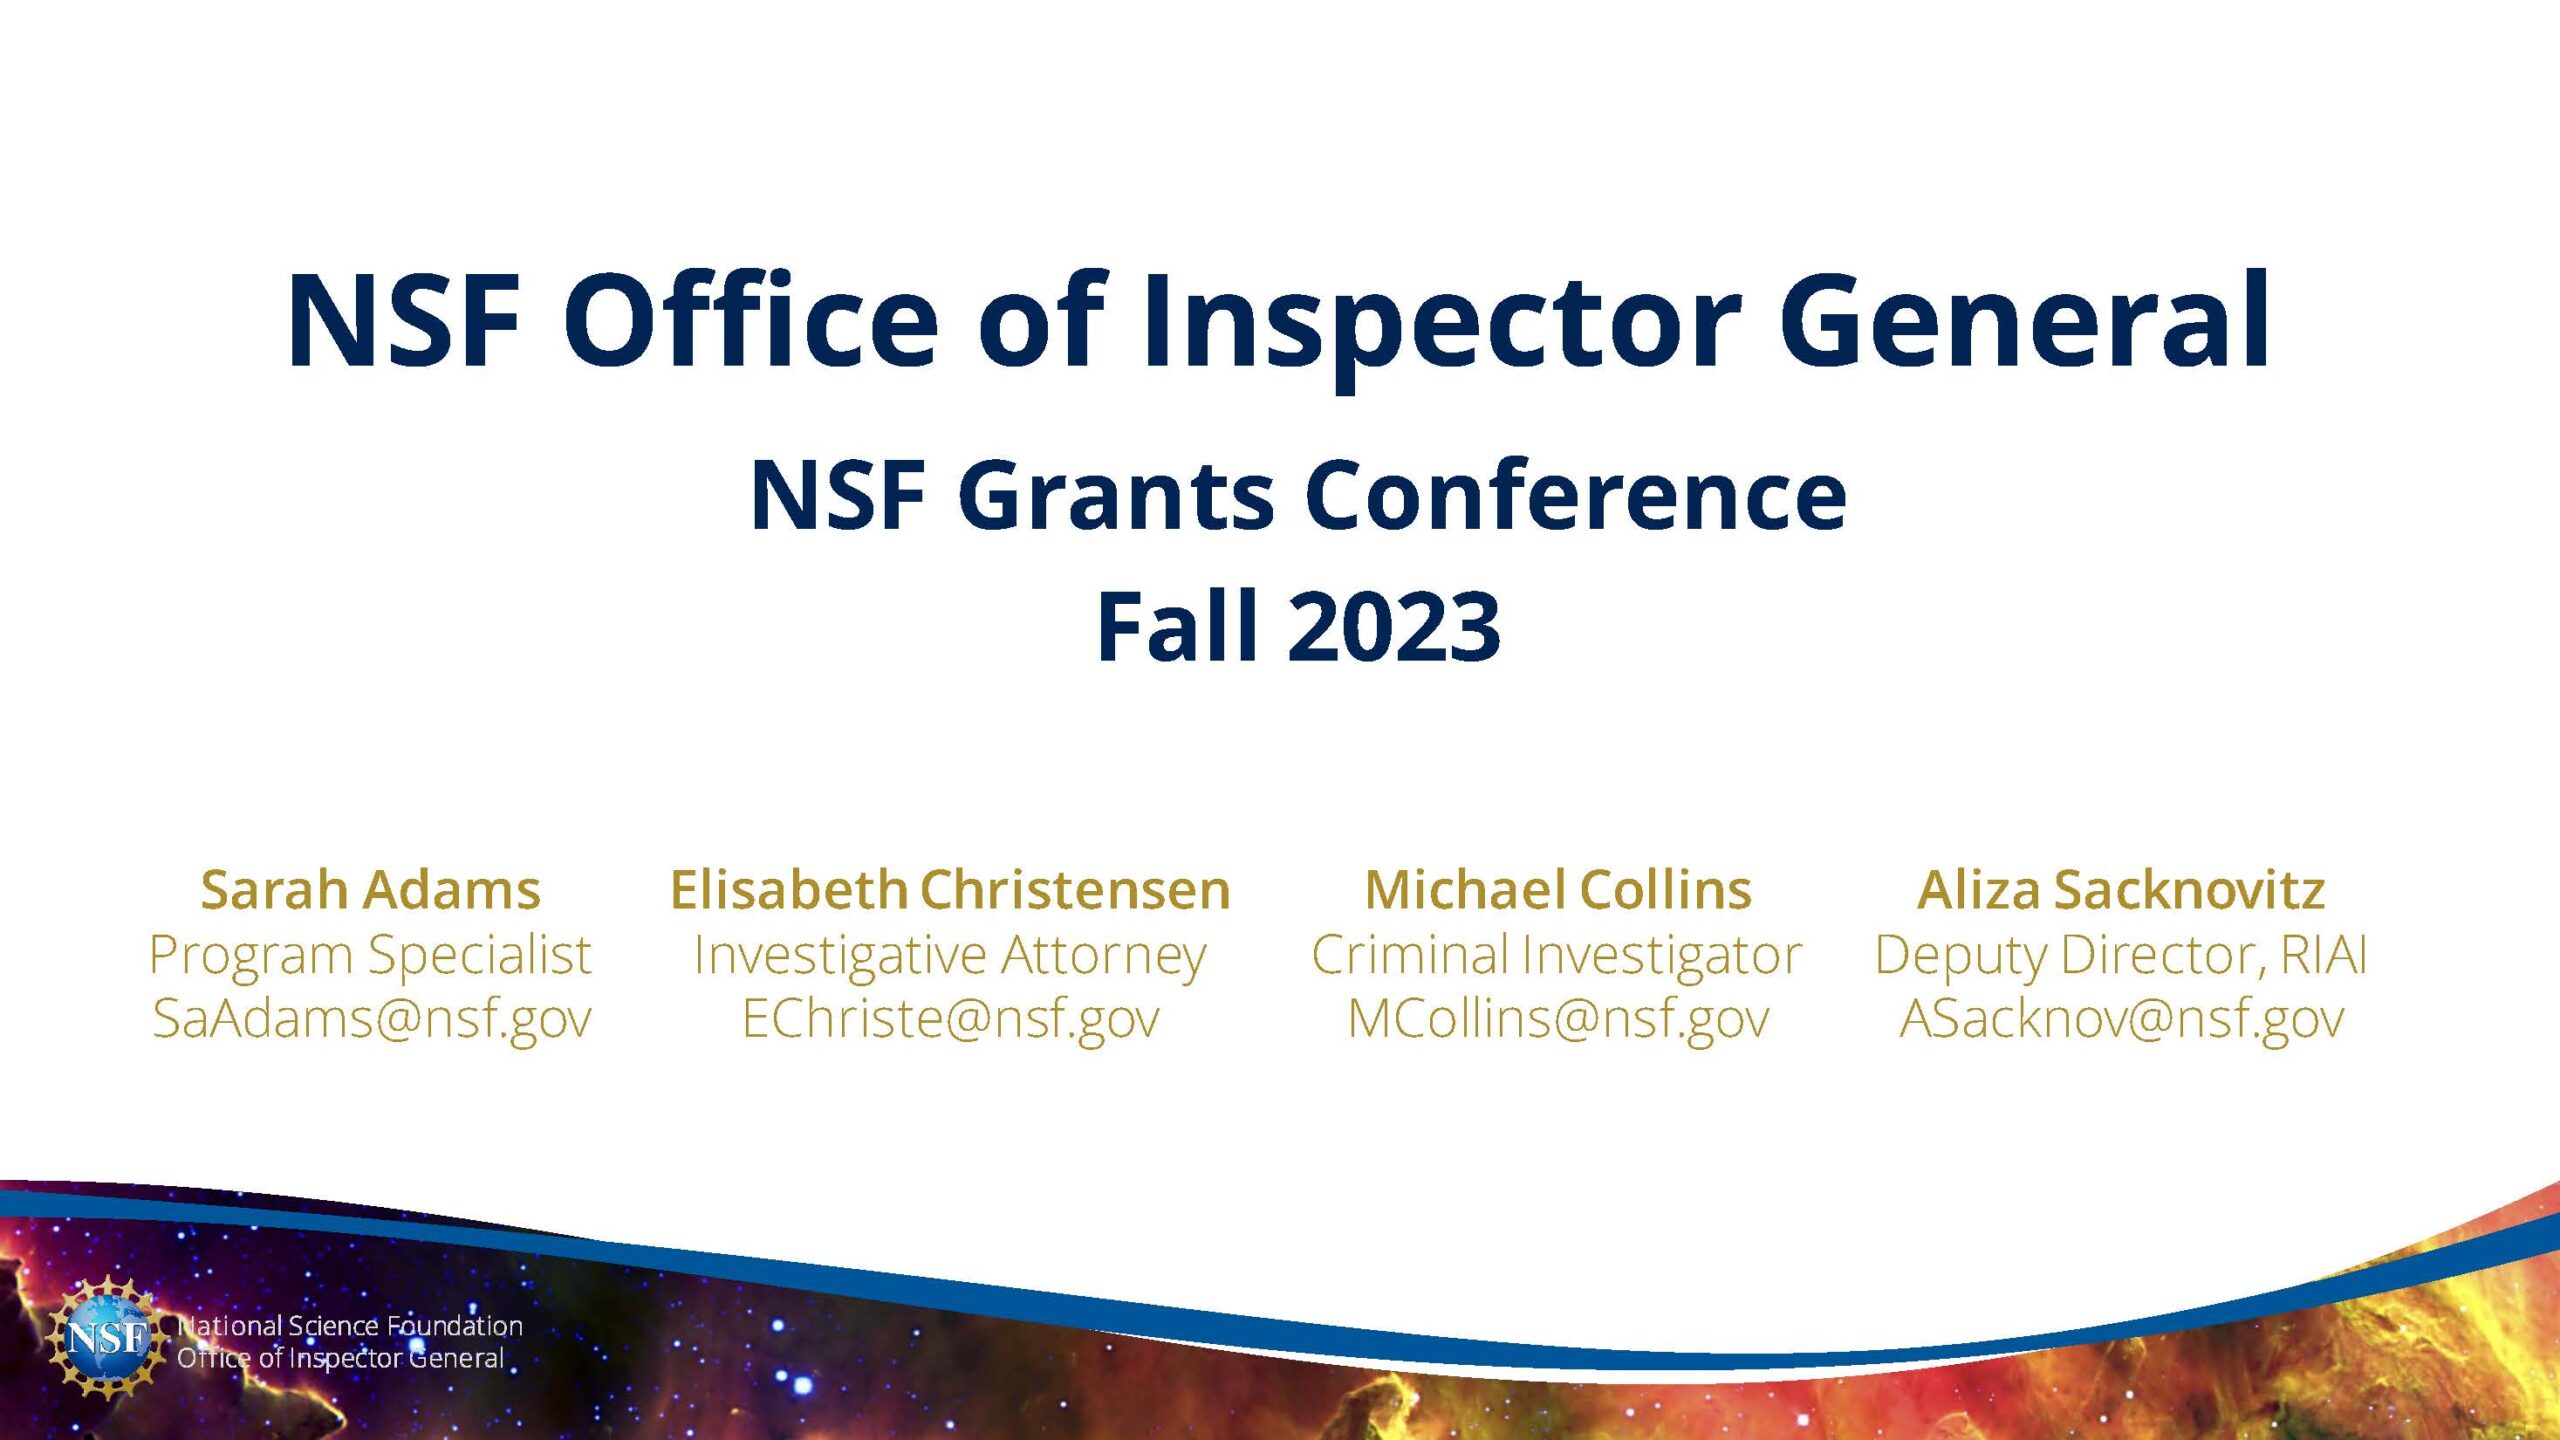 OIG-2023-Grants-Conference_FINAL_Page_01